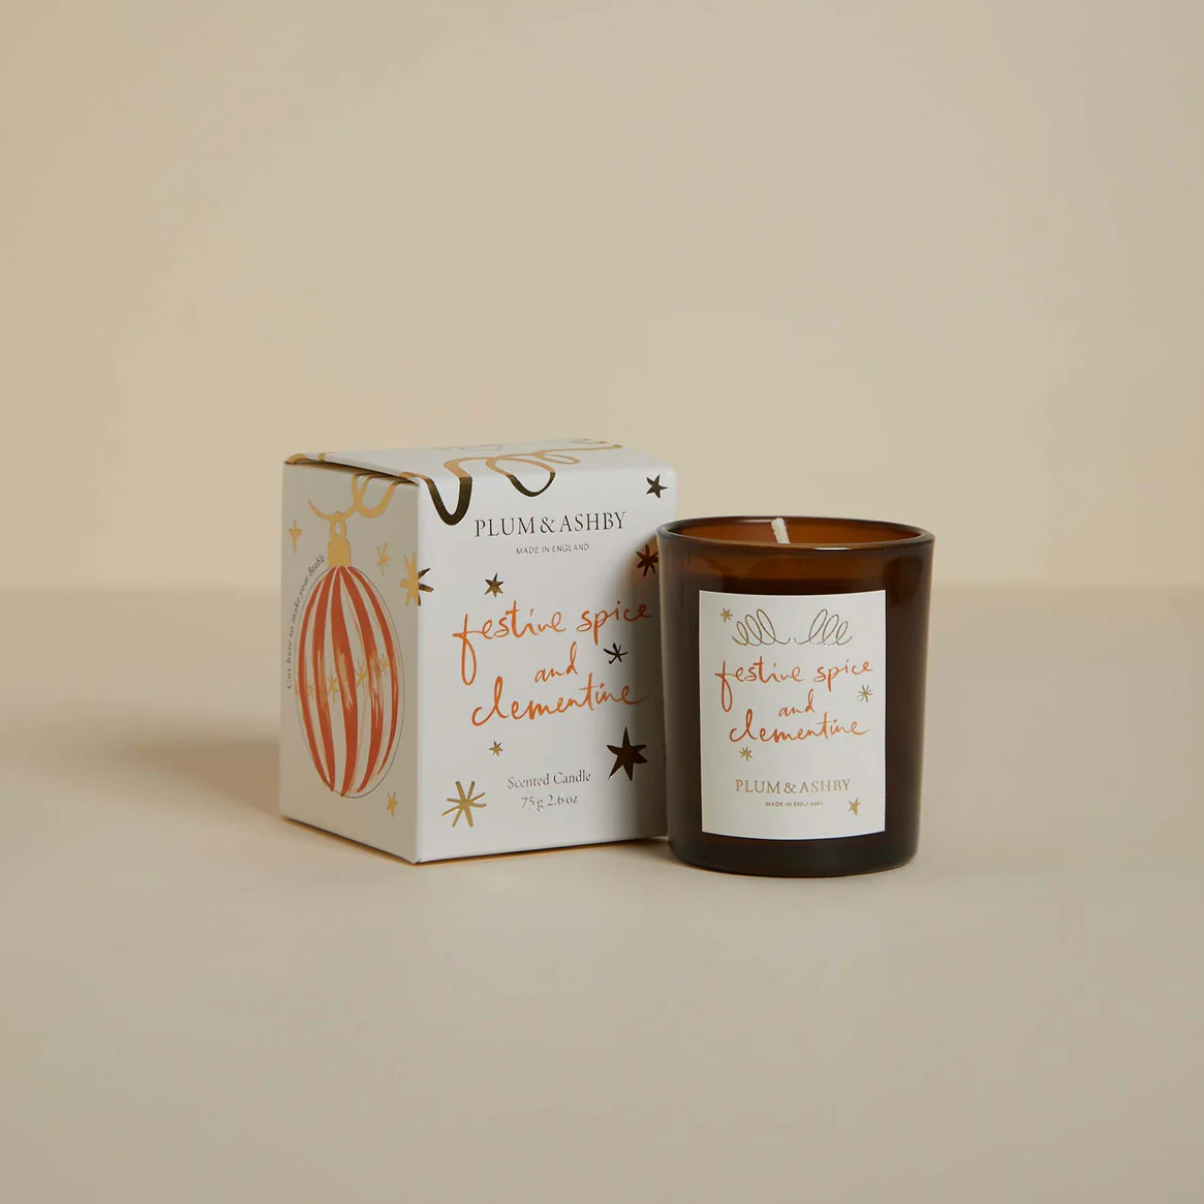 Plum & Ashby Festive Spice and Clementine Votive